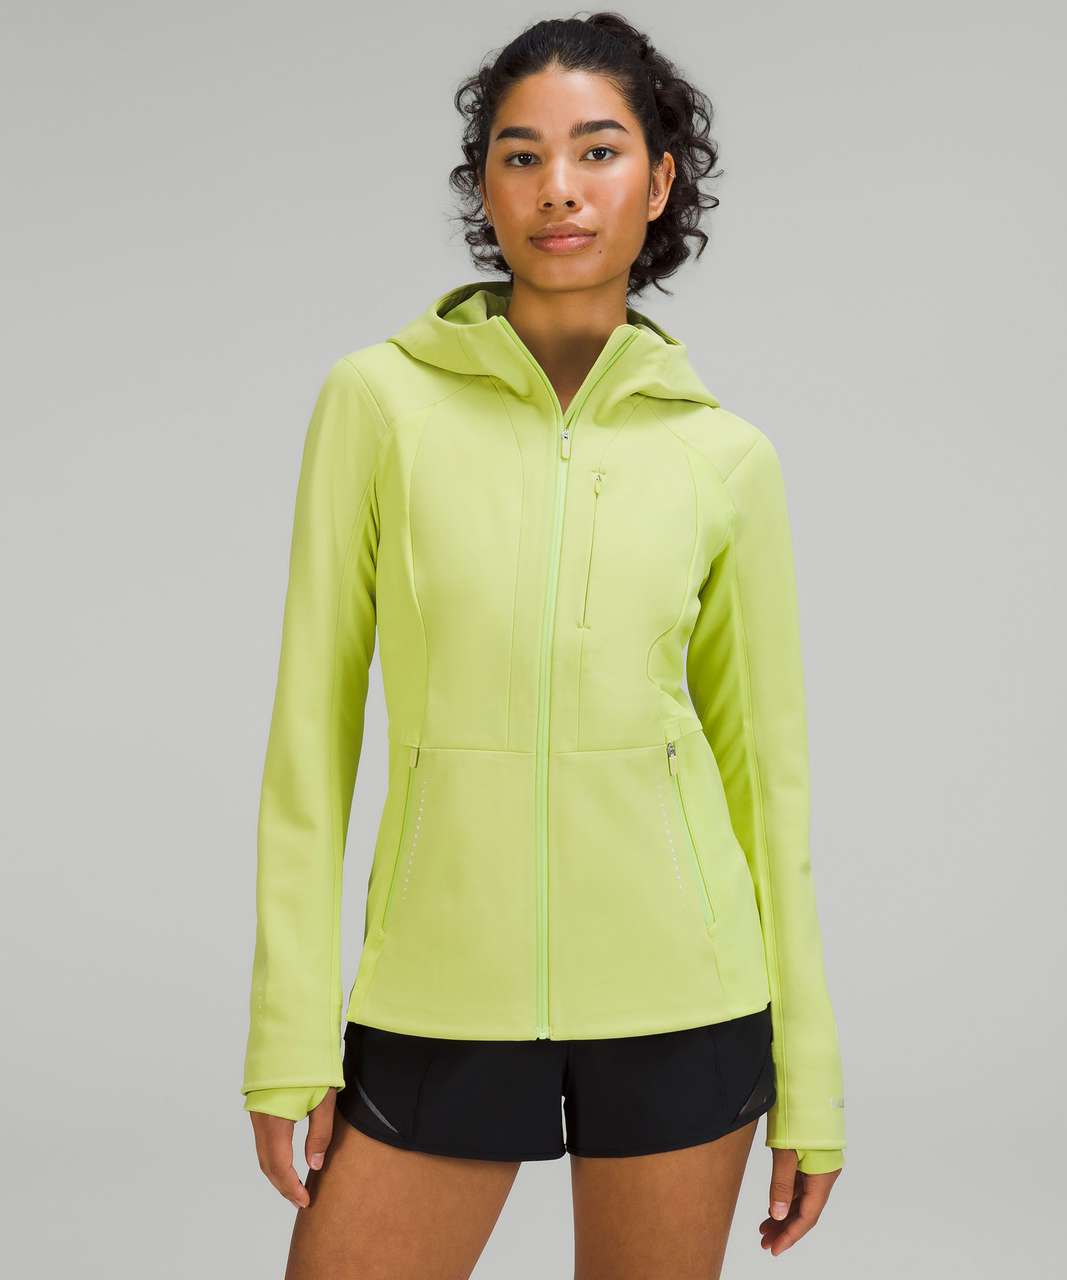 Stay Warm and Stylish with the Lululemon Cross Chill Jacket